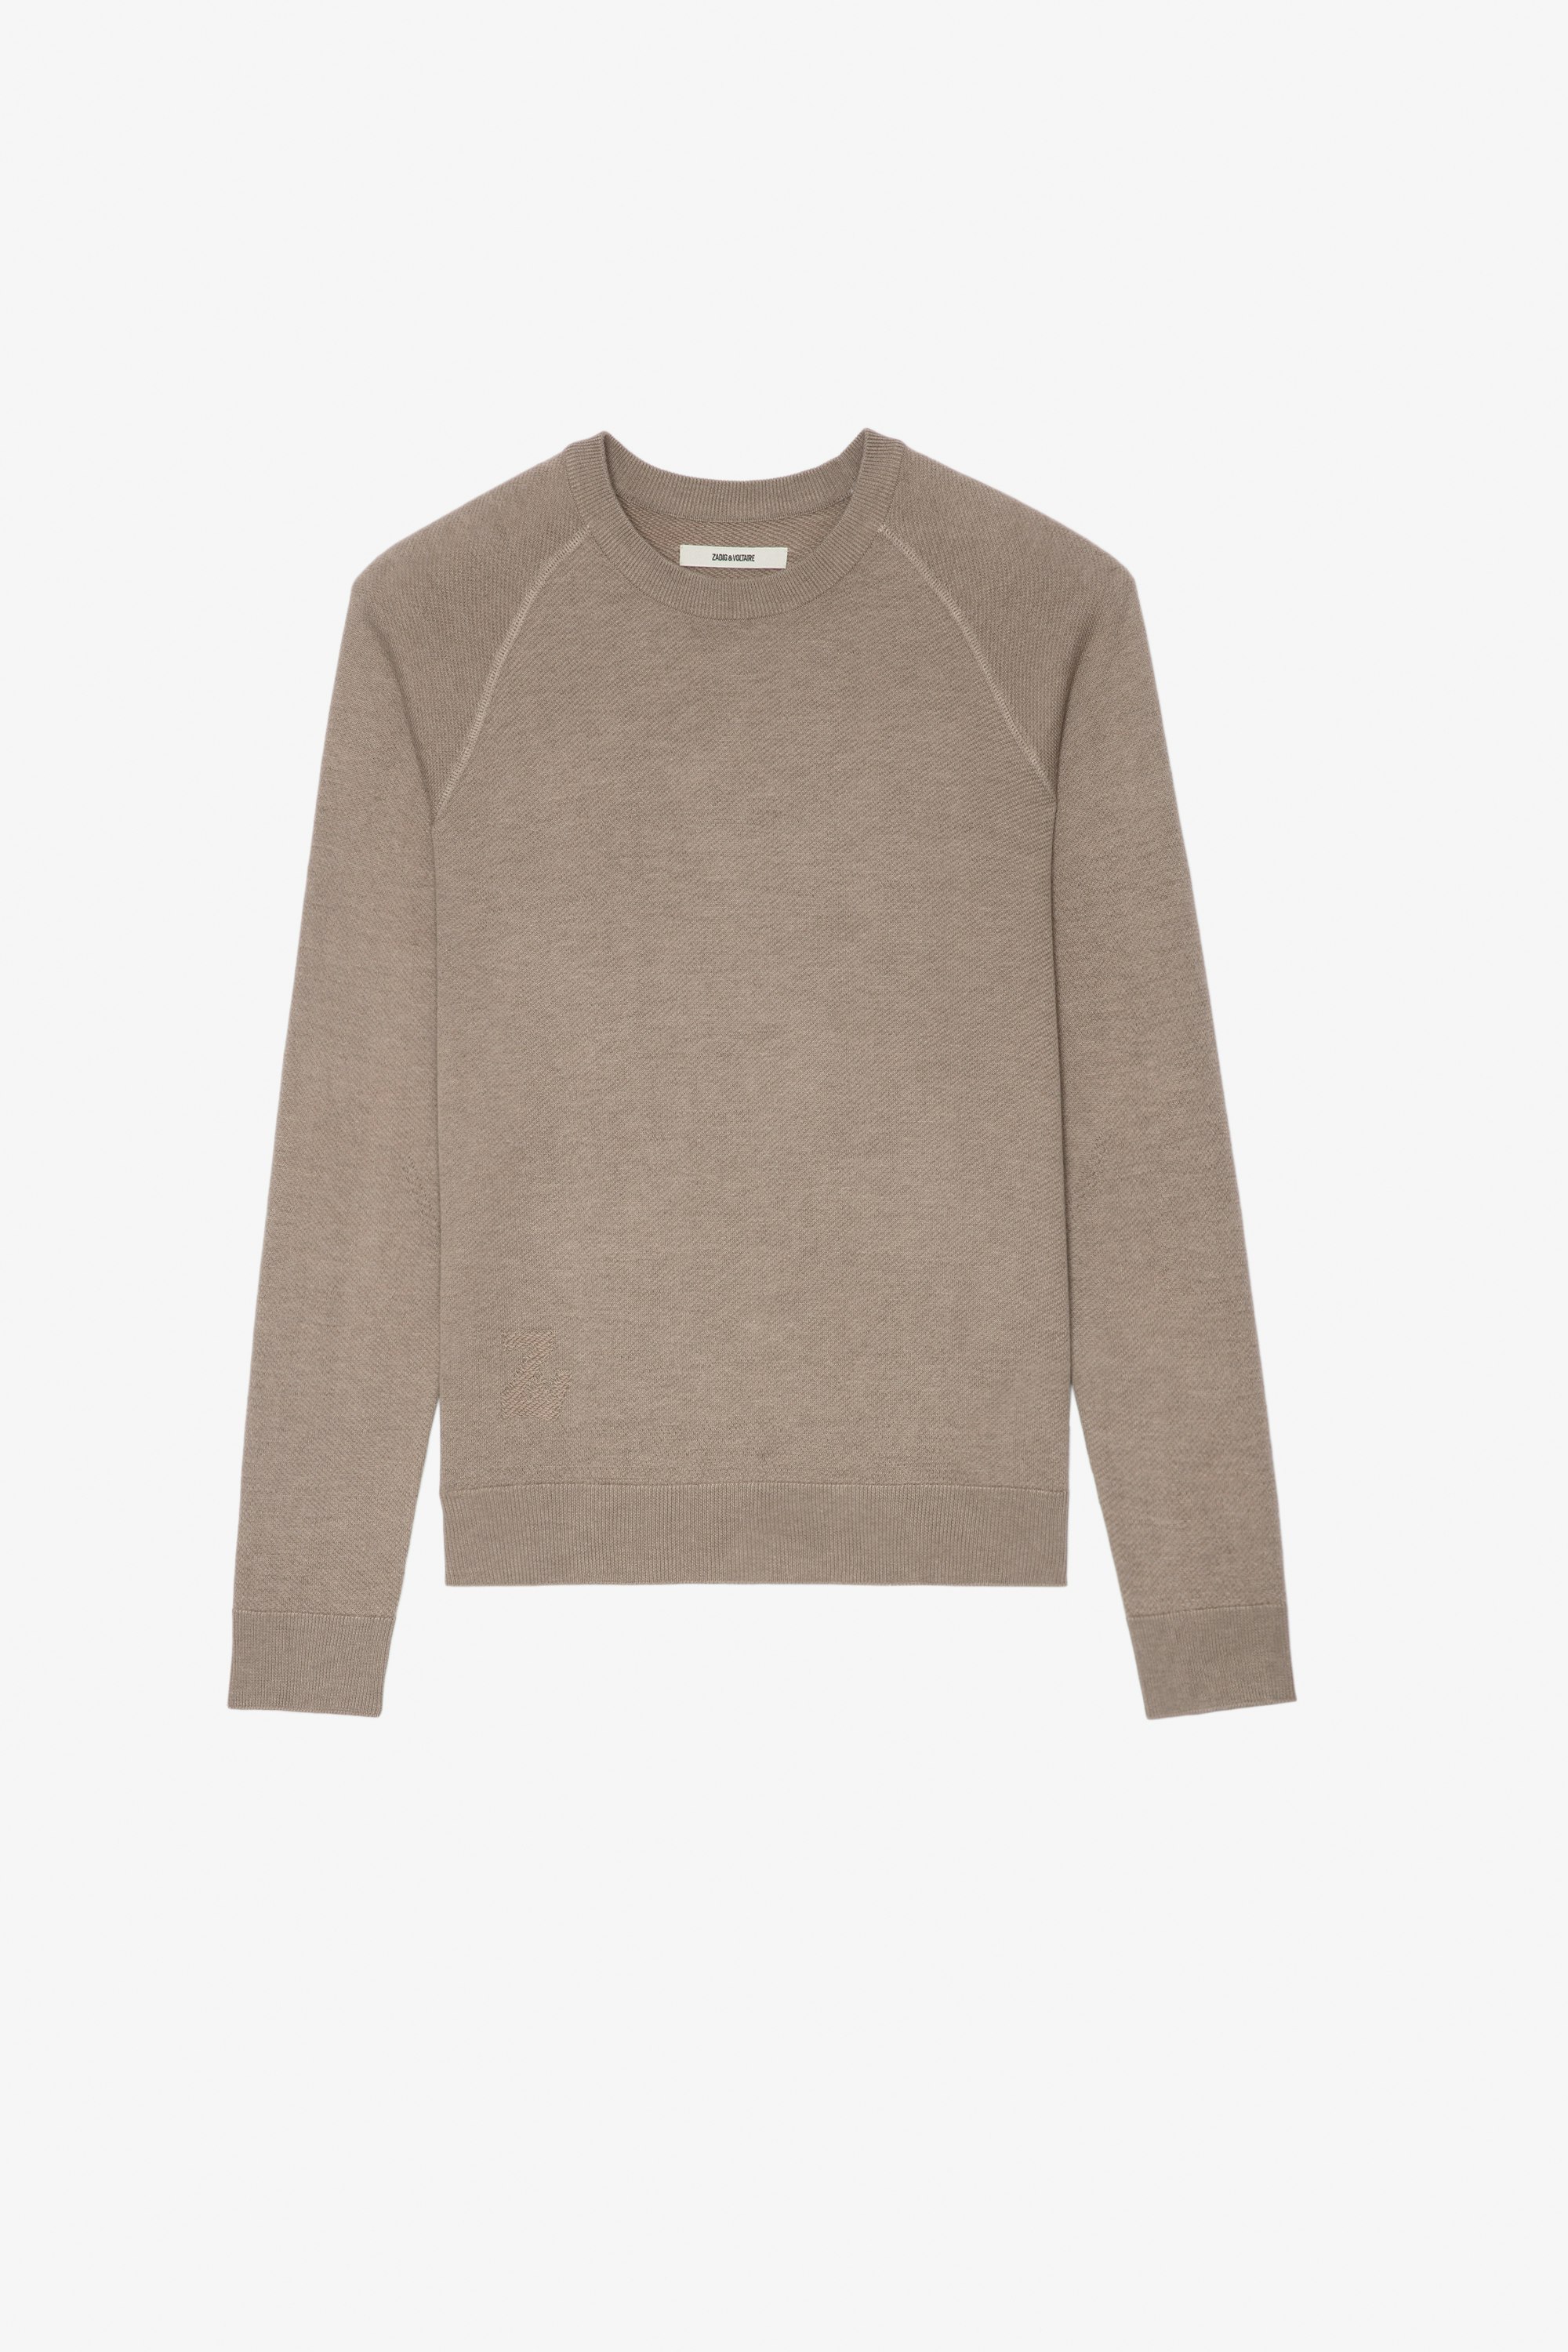 Pull Thomaso Pull en maille beige à col rond et manches longues Homme